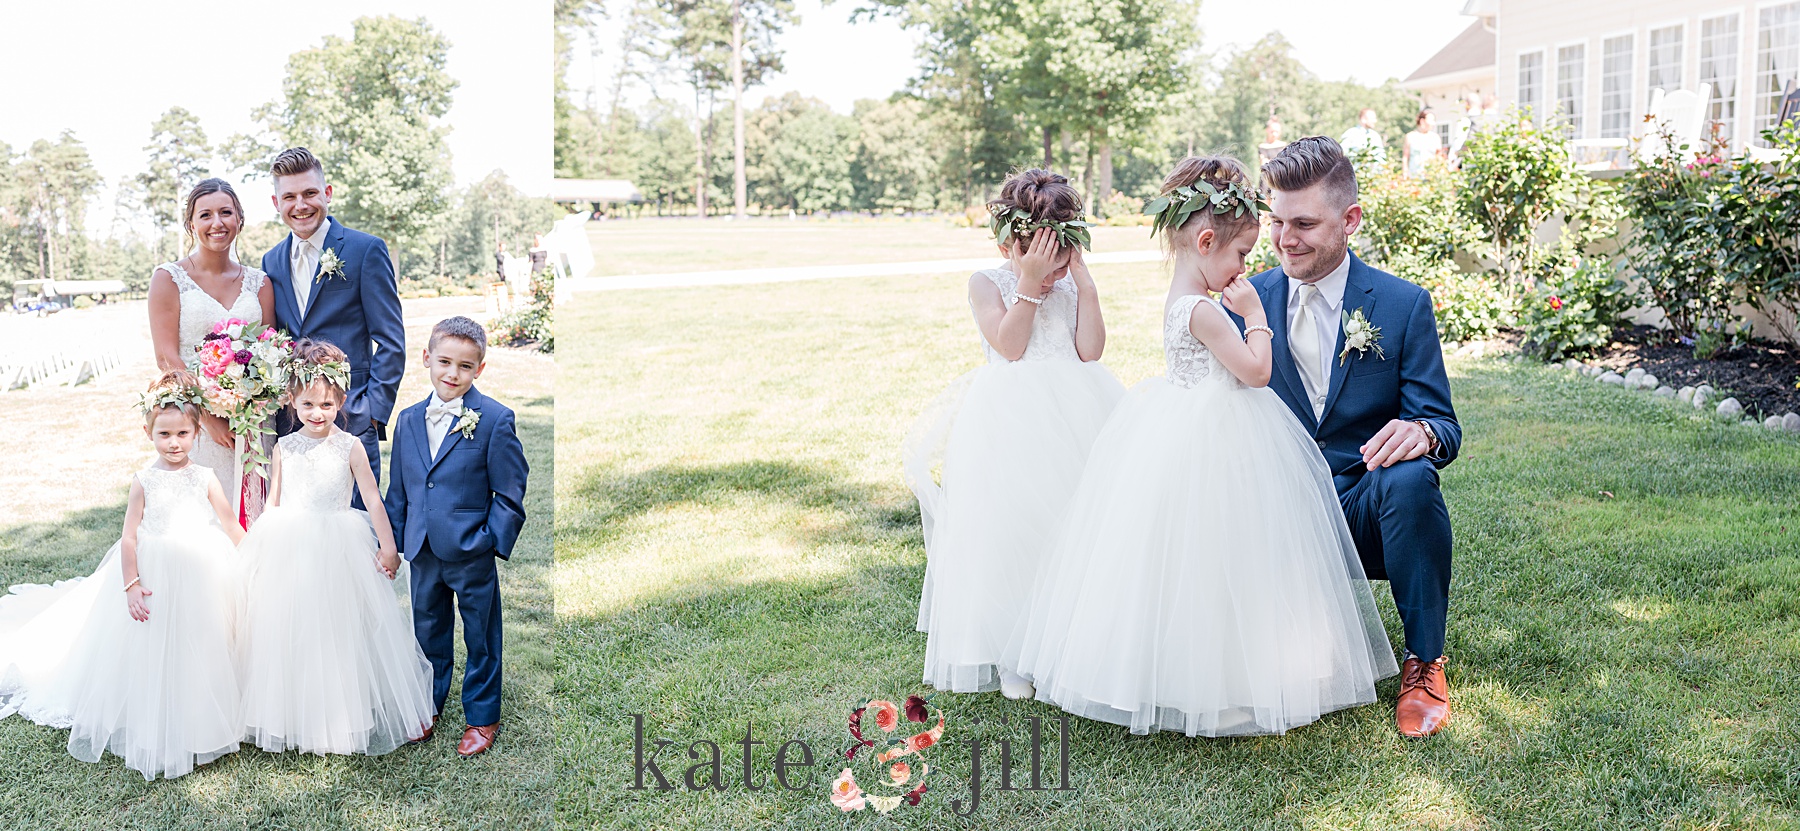 flower girls and ring bearer with bride and groom